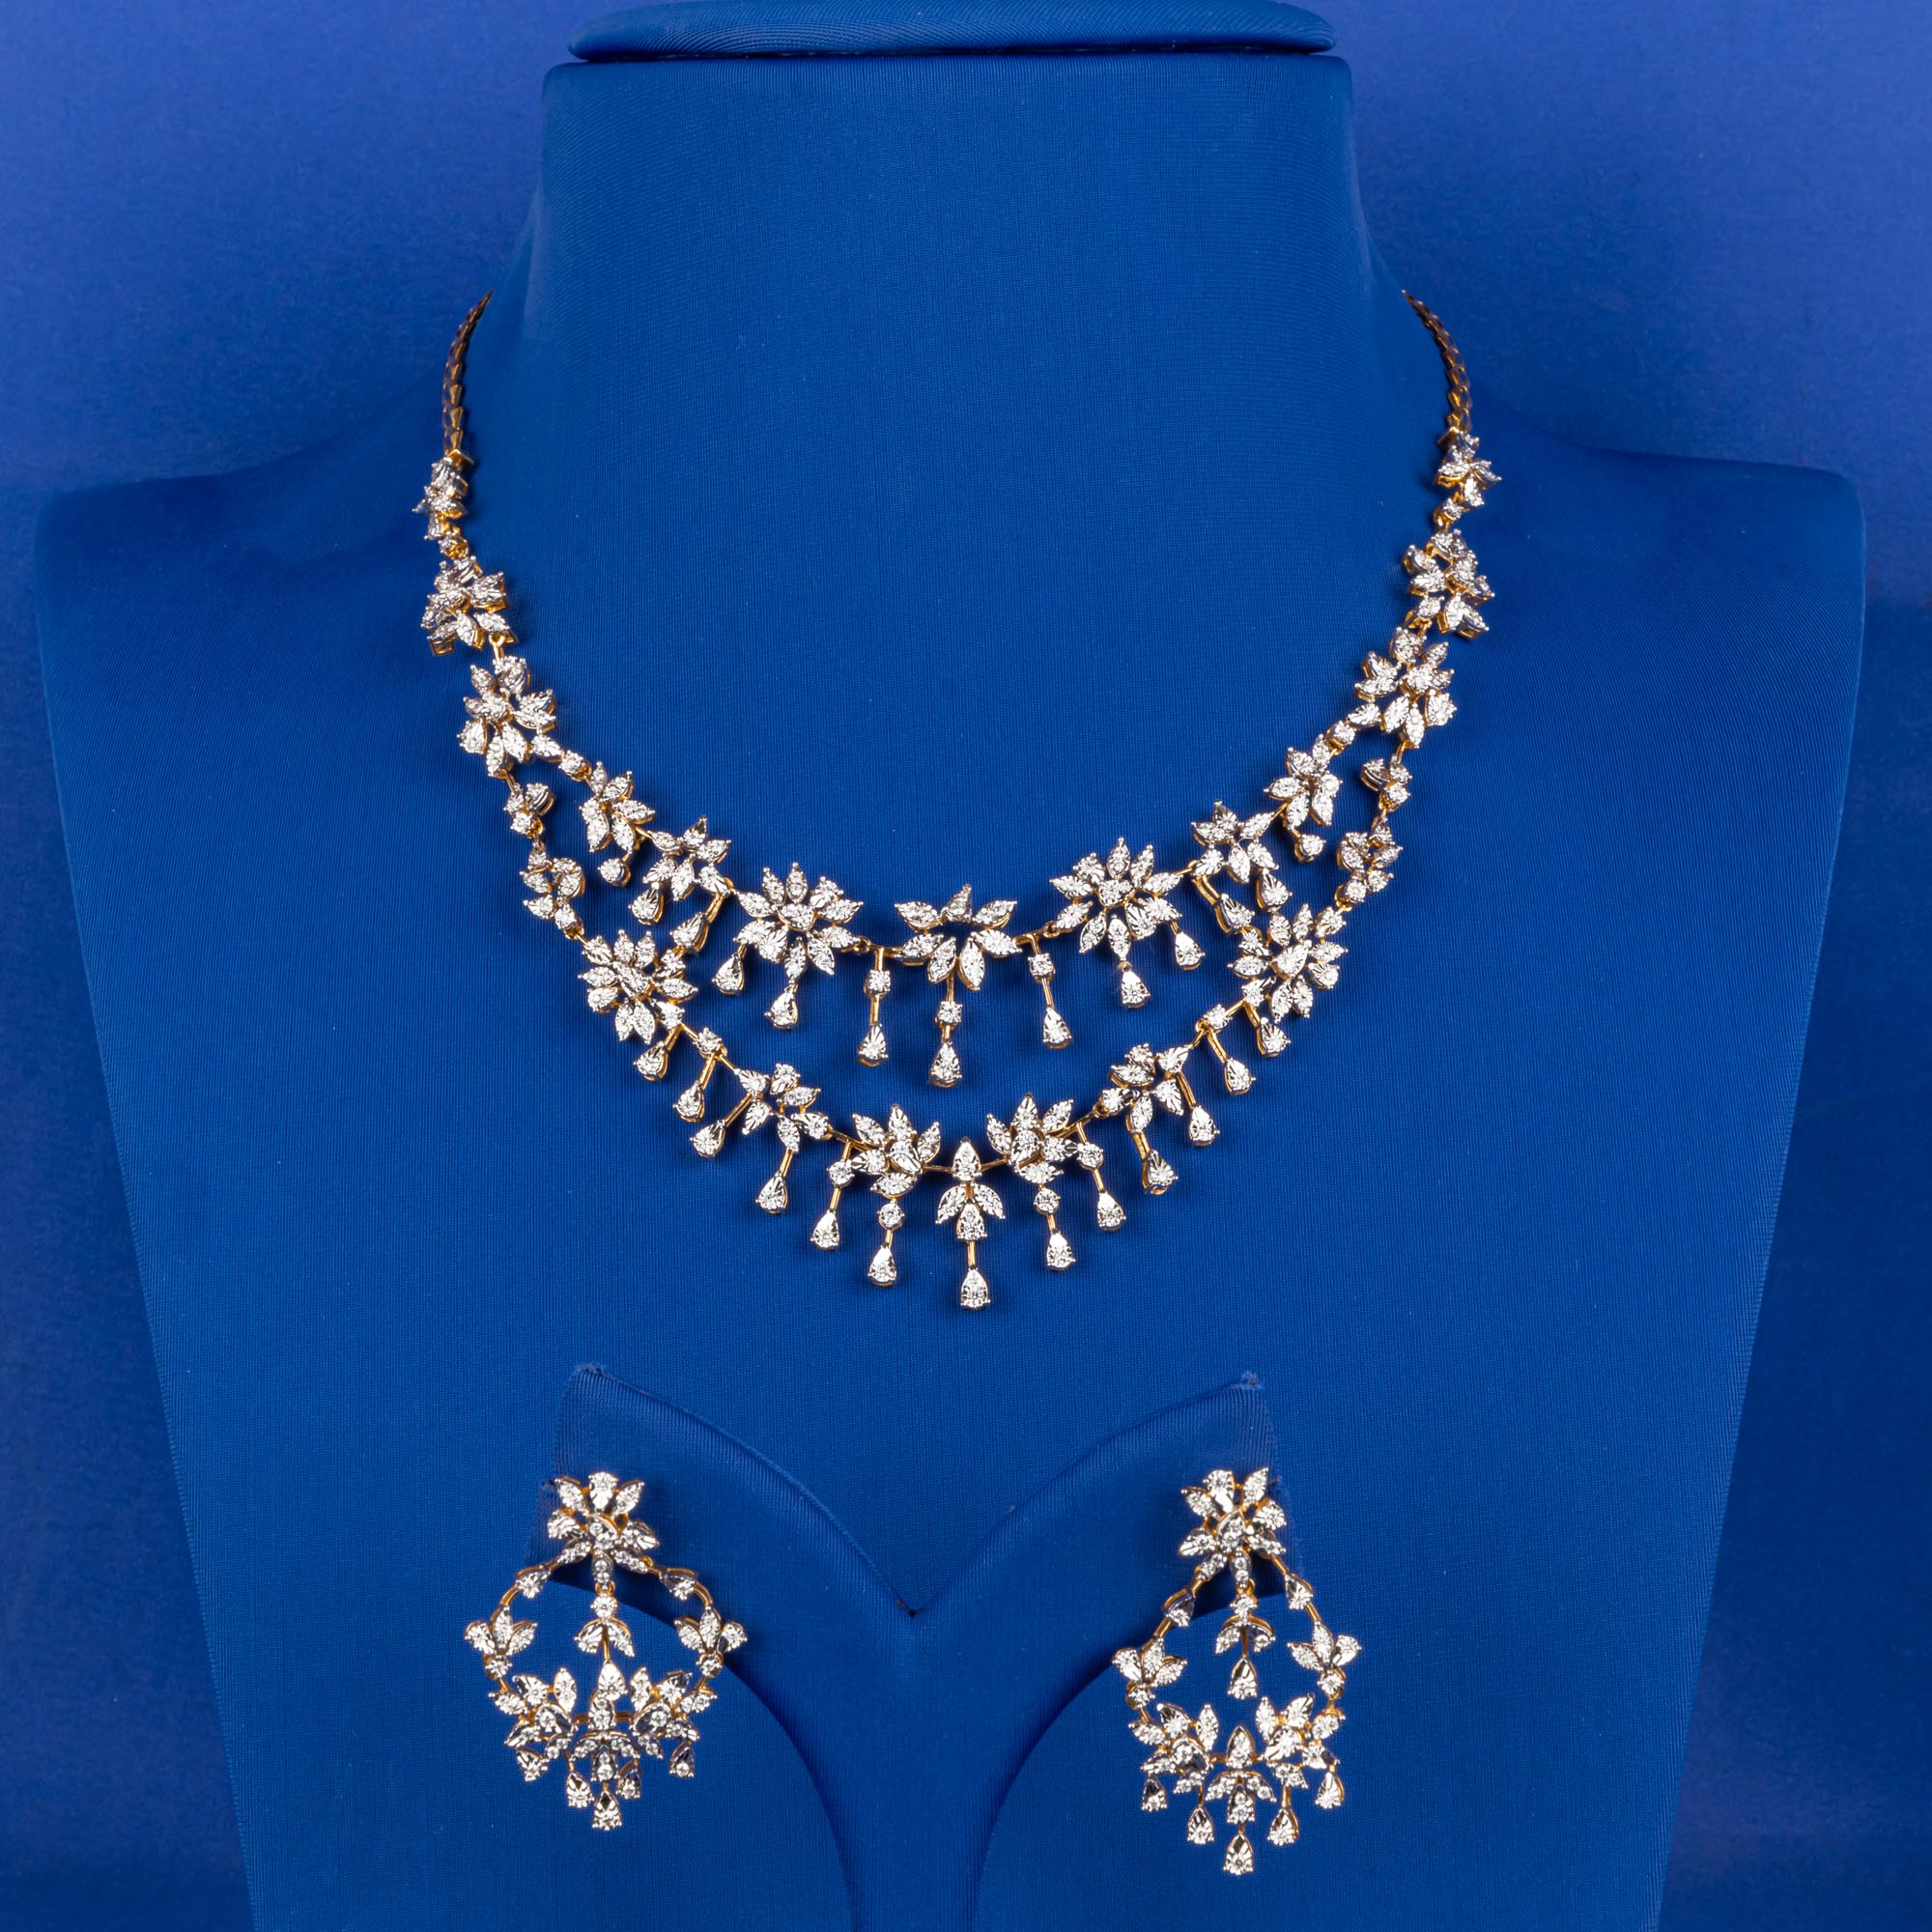 Handmade 18K yellow Gold Diamond Necklace and Earrings Set